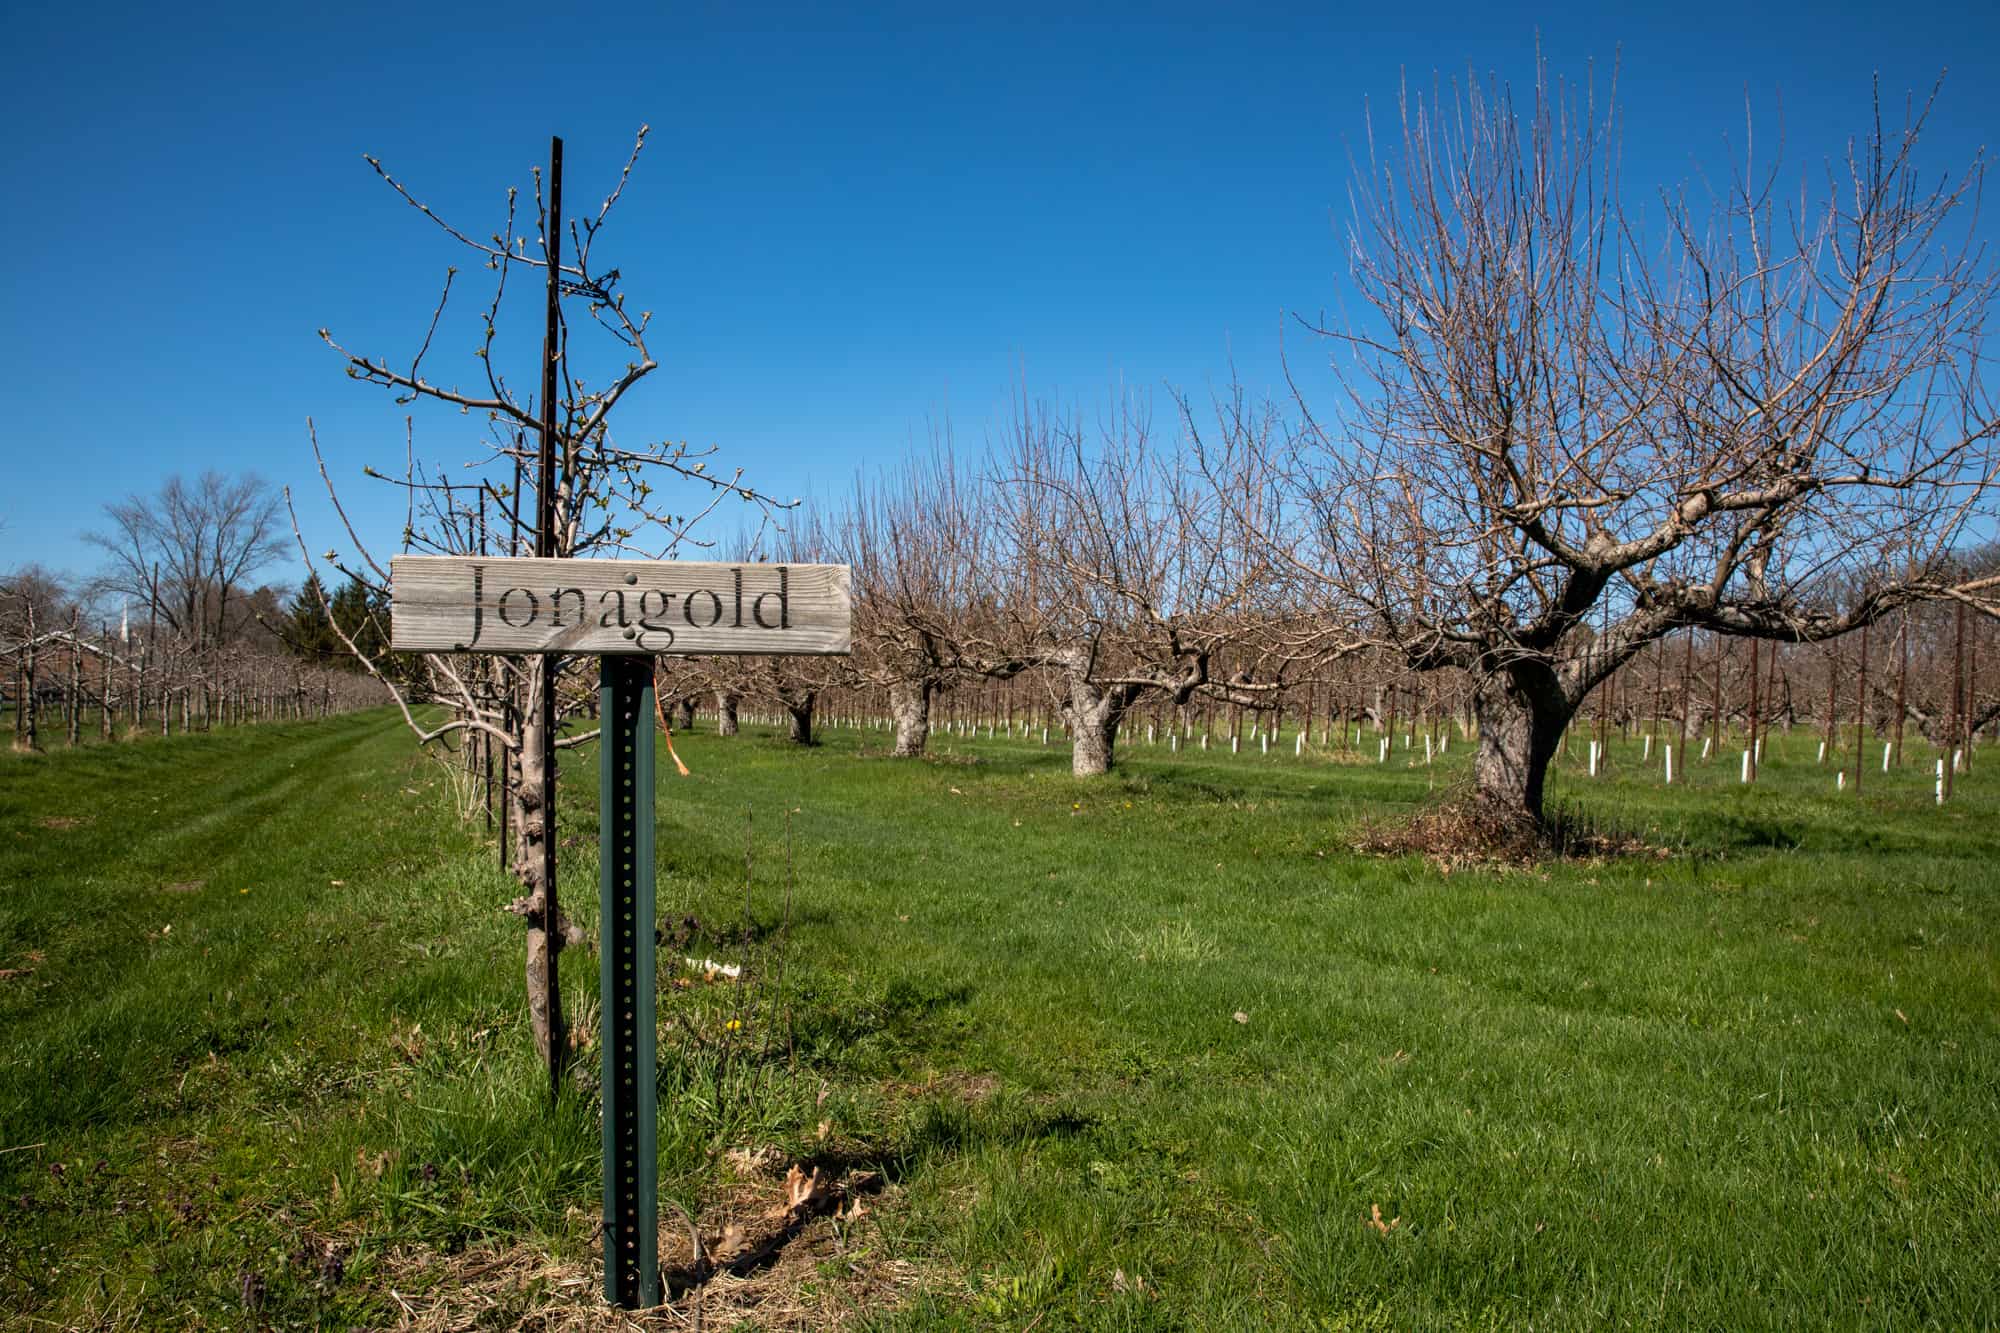 Rows of apple trees labeled for the varieties they yield are only starting to bud this week at the County Line Orchard.